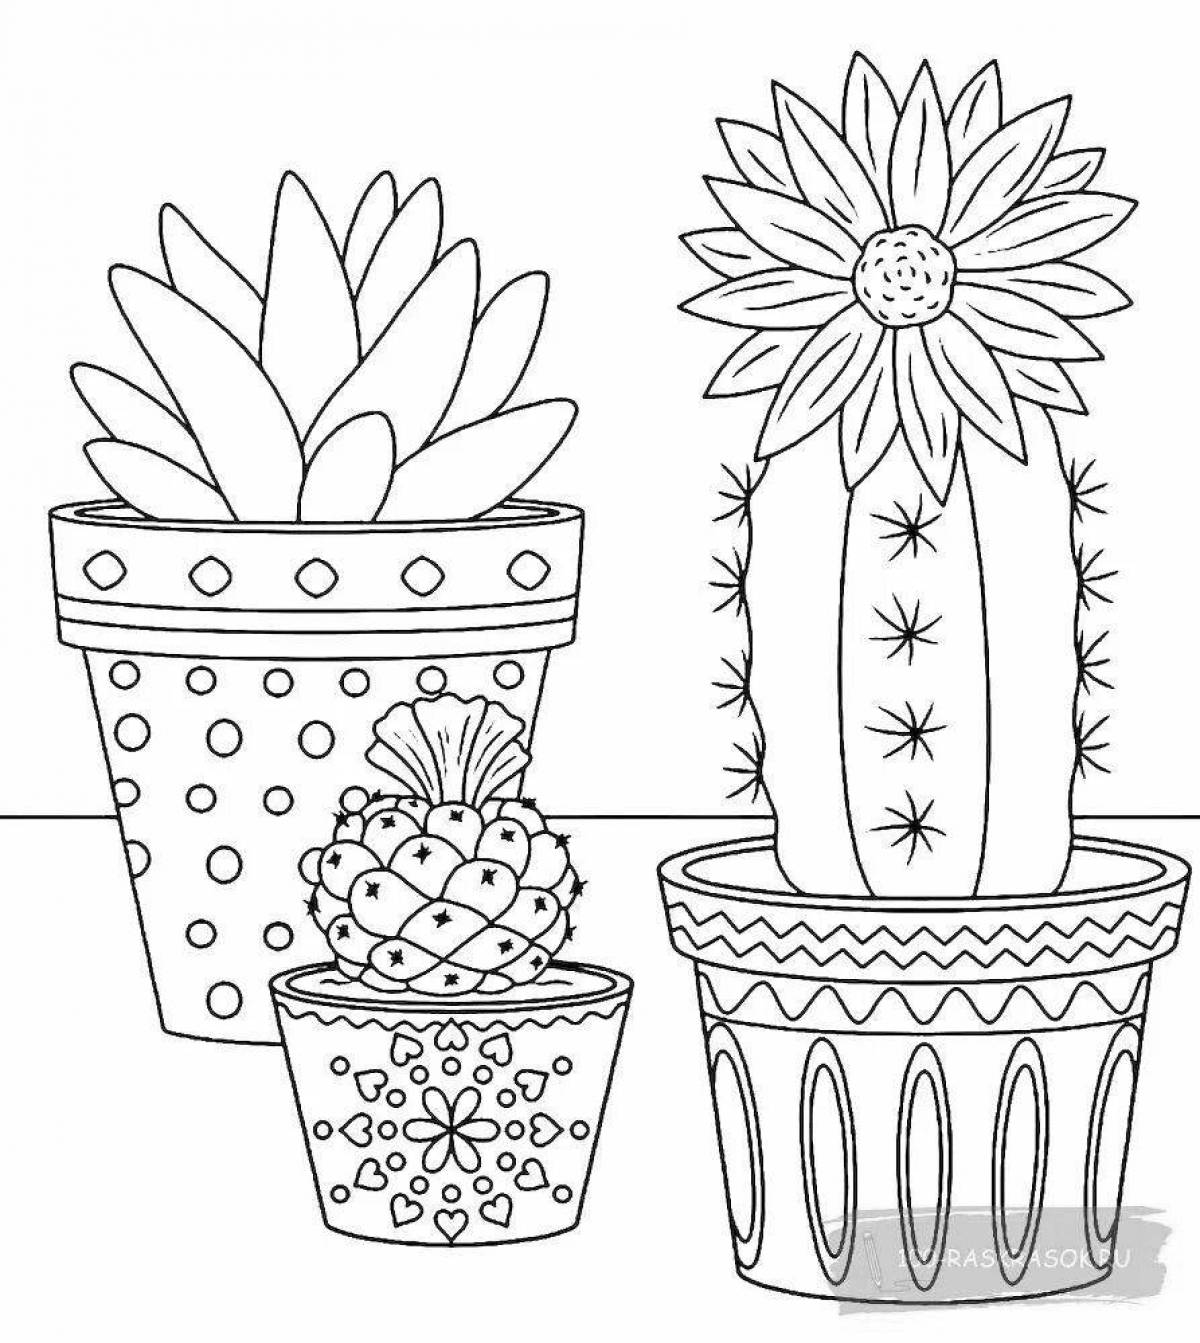 Adorable indoor flowers coloring book for kids